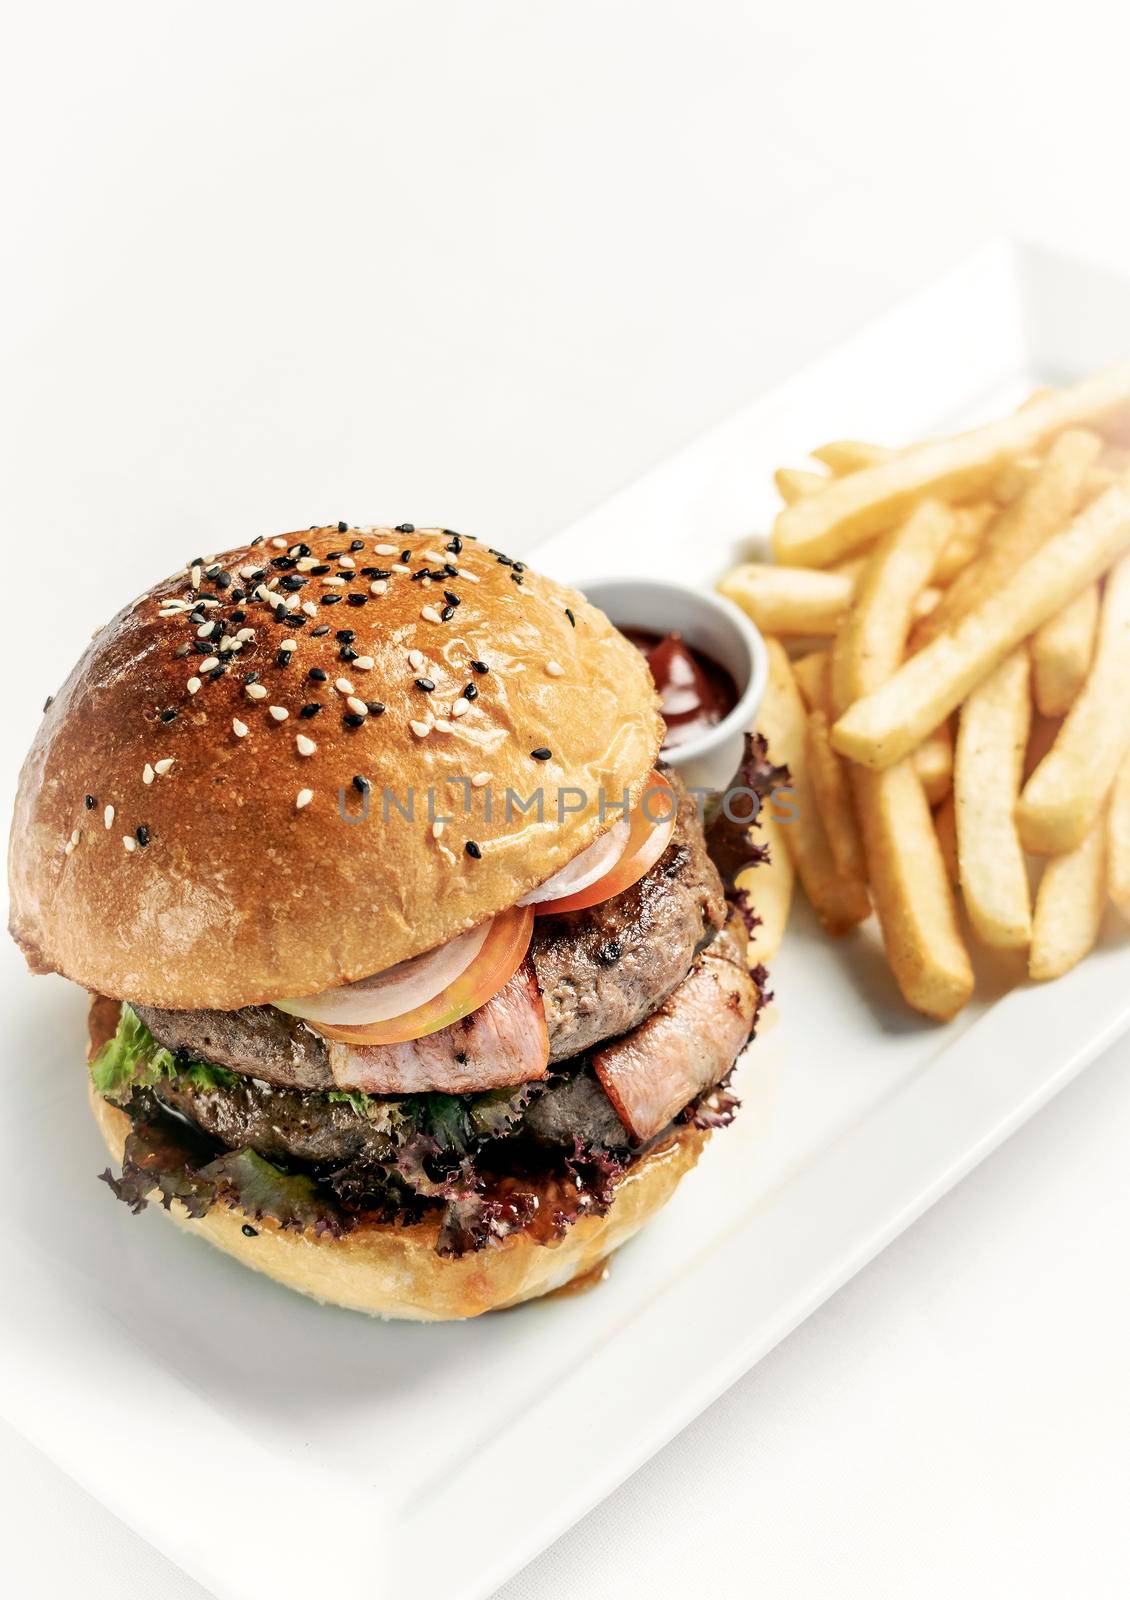 beef burger with french fries platter on white table by jackmalipan